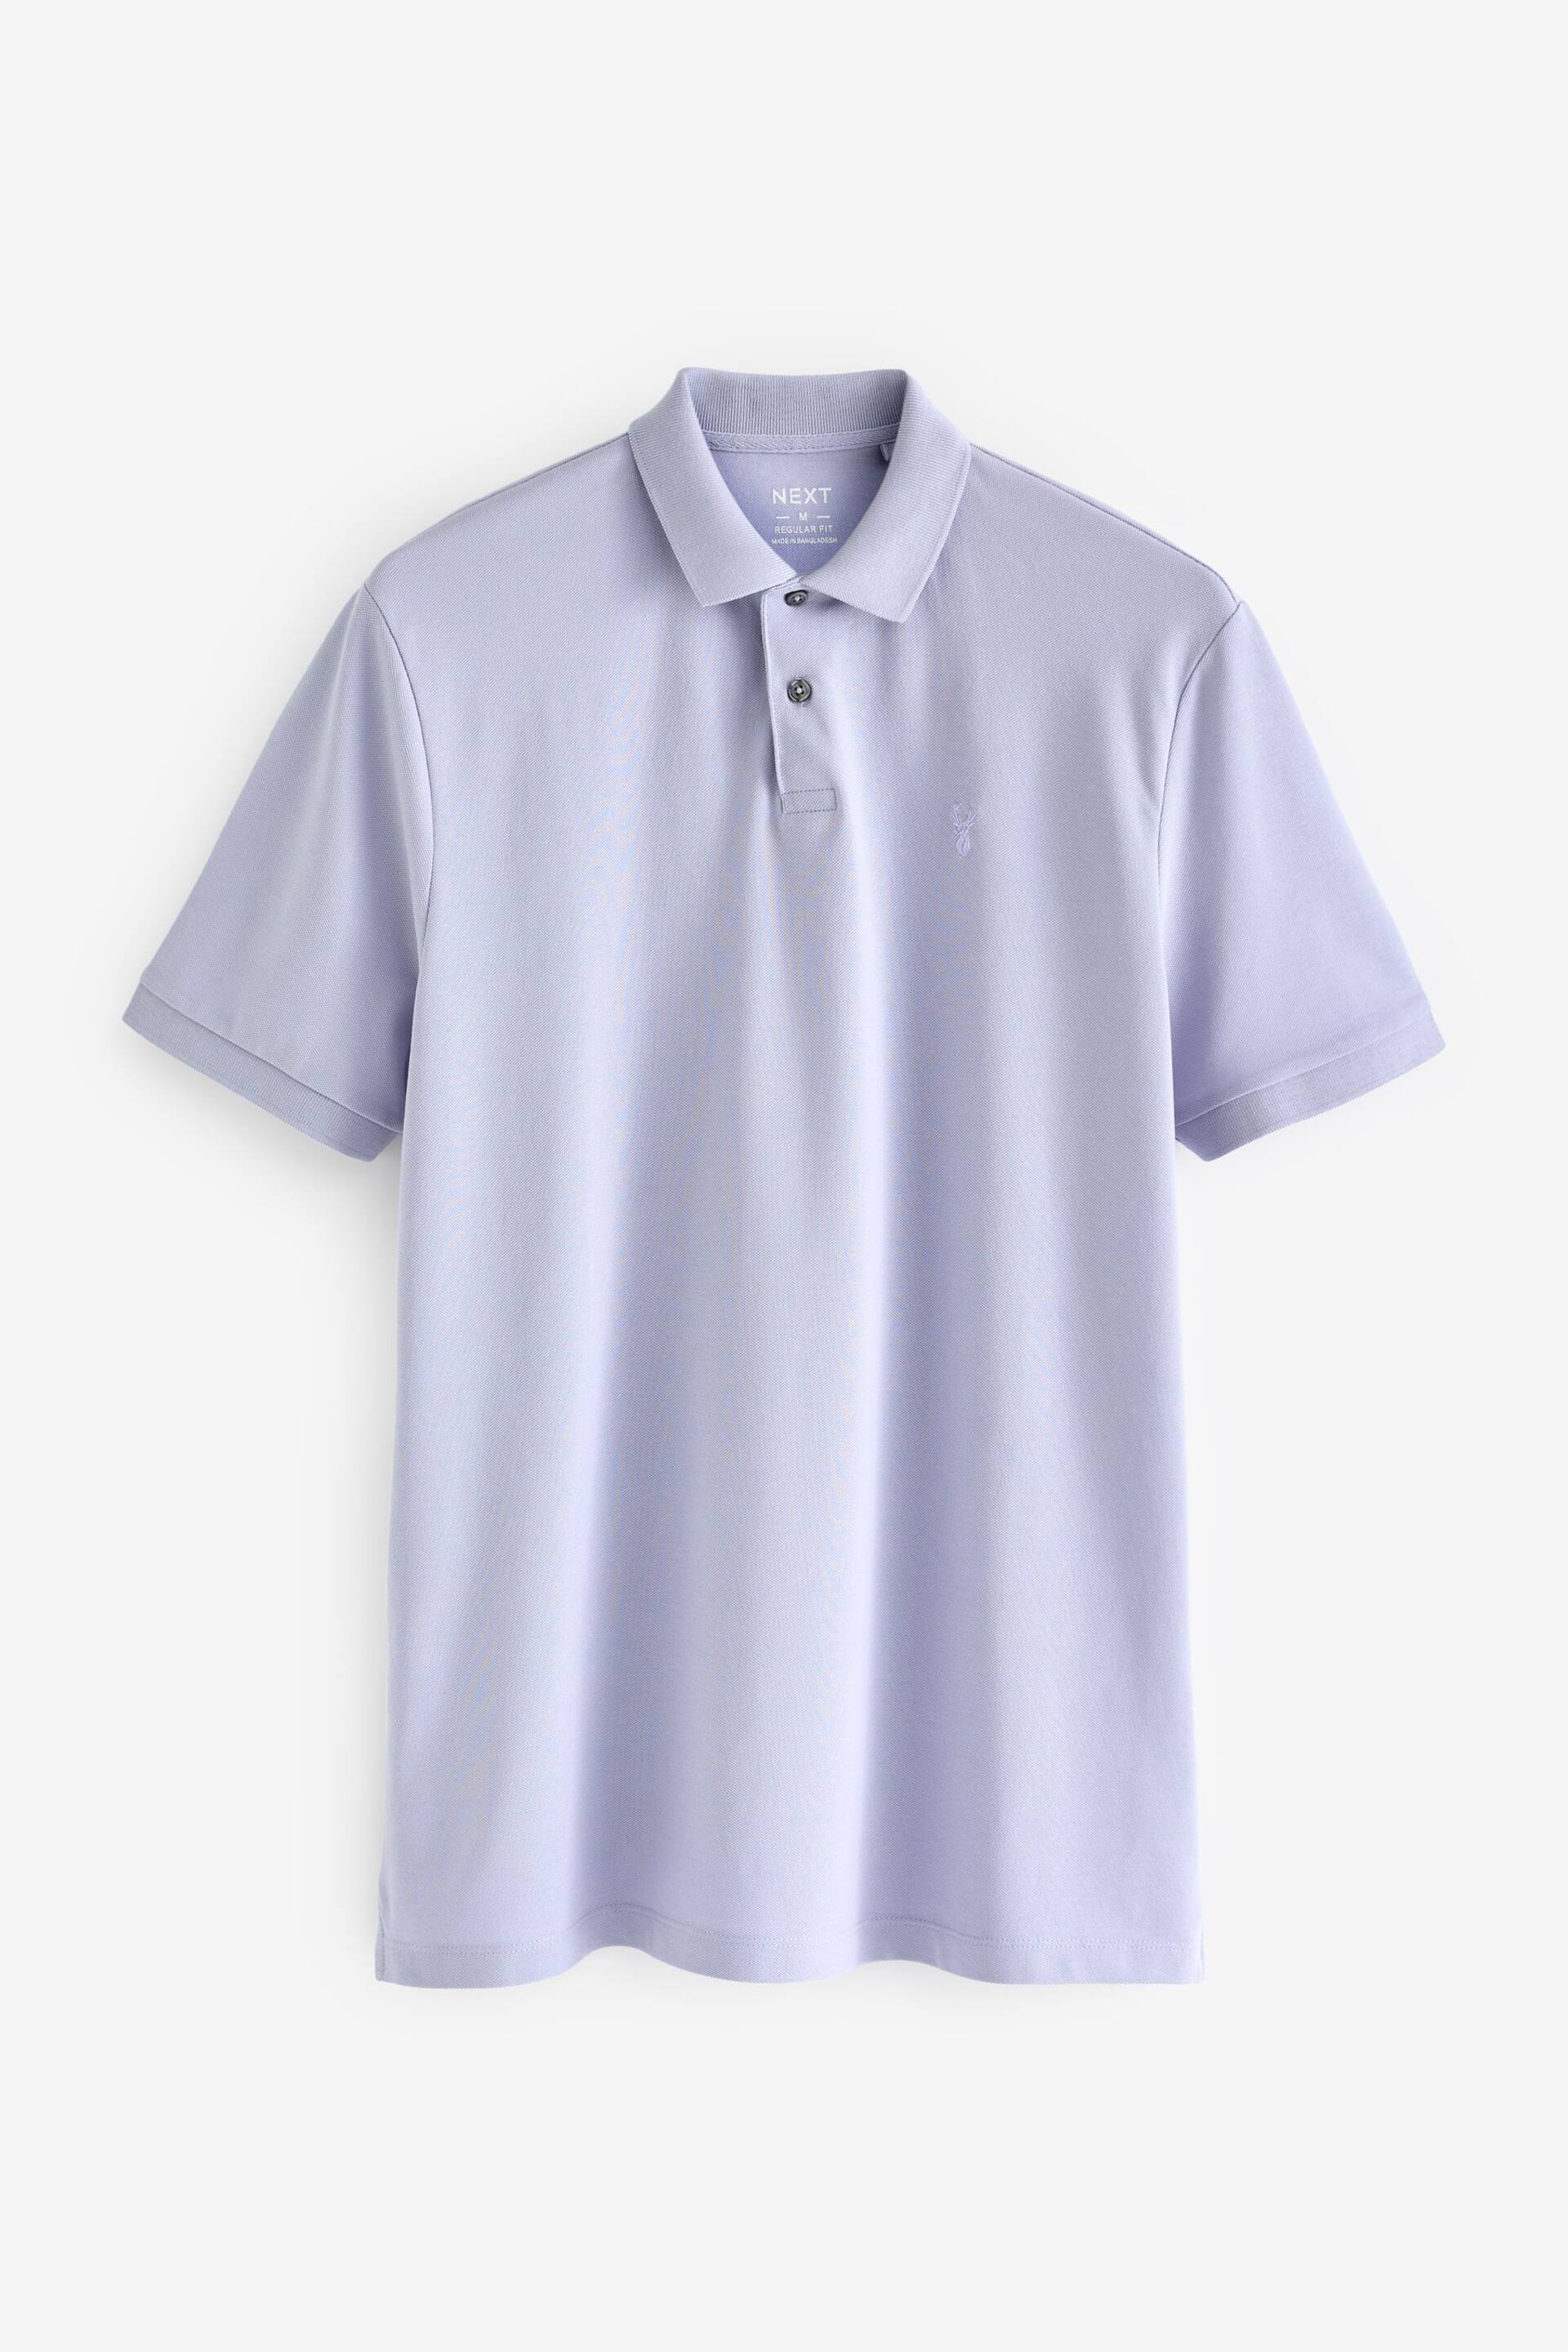 Purple Lilac Regular Fit Short Sleeve Pique Polo Shirt - Image 6 of 8